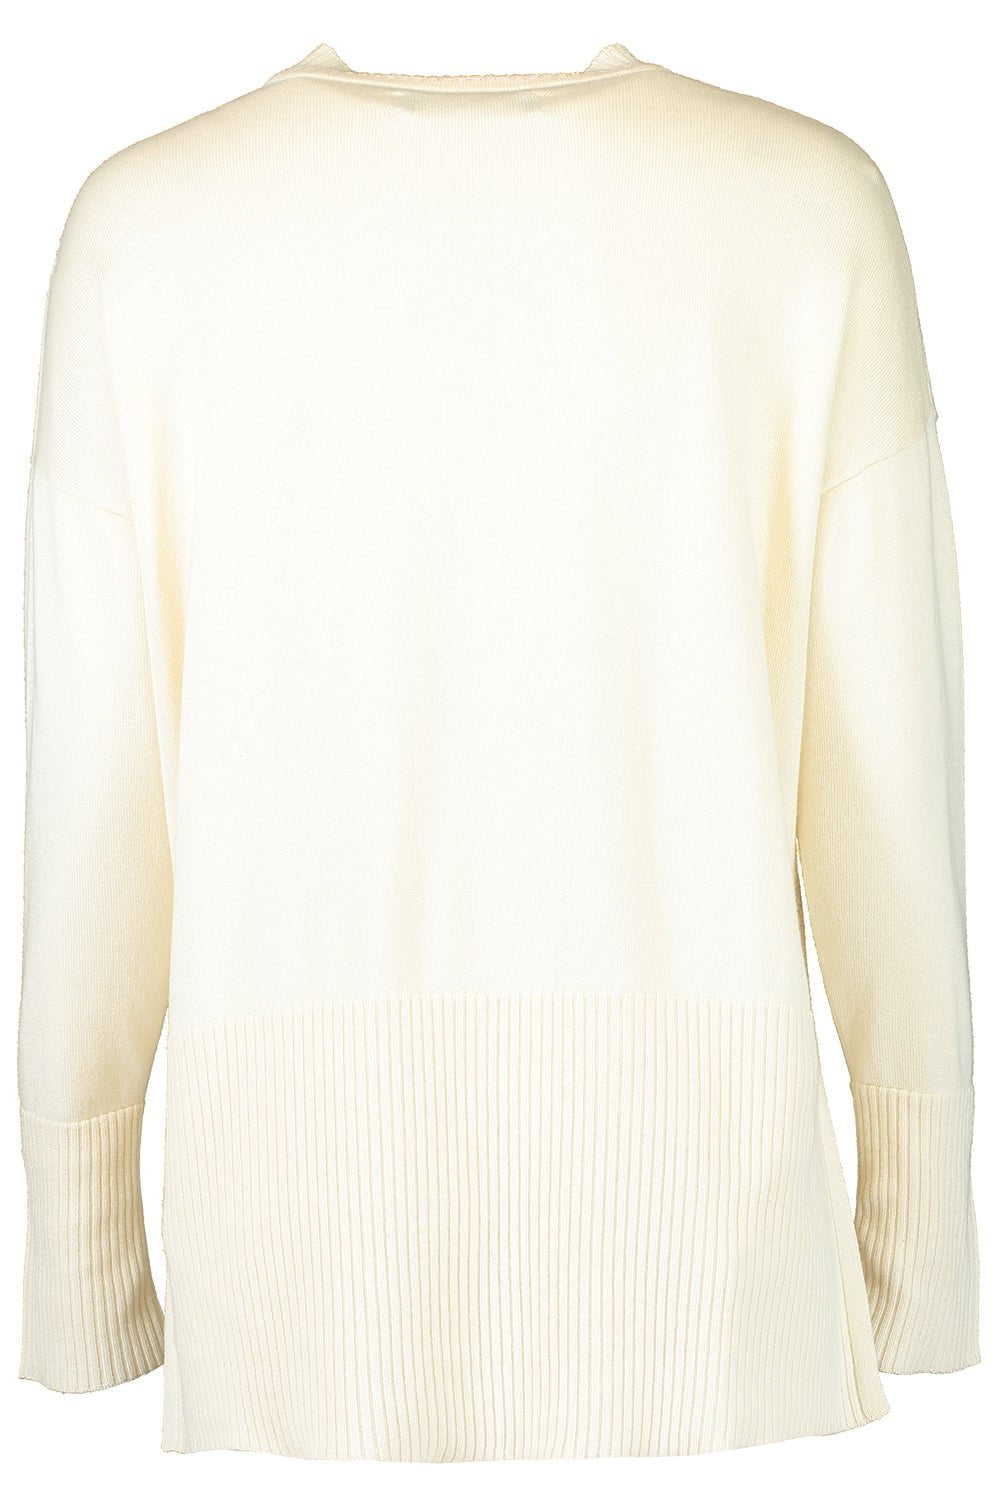 BRANDON MAXWELL-Relaxed Ribbed Trim Sweater-